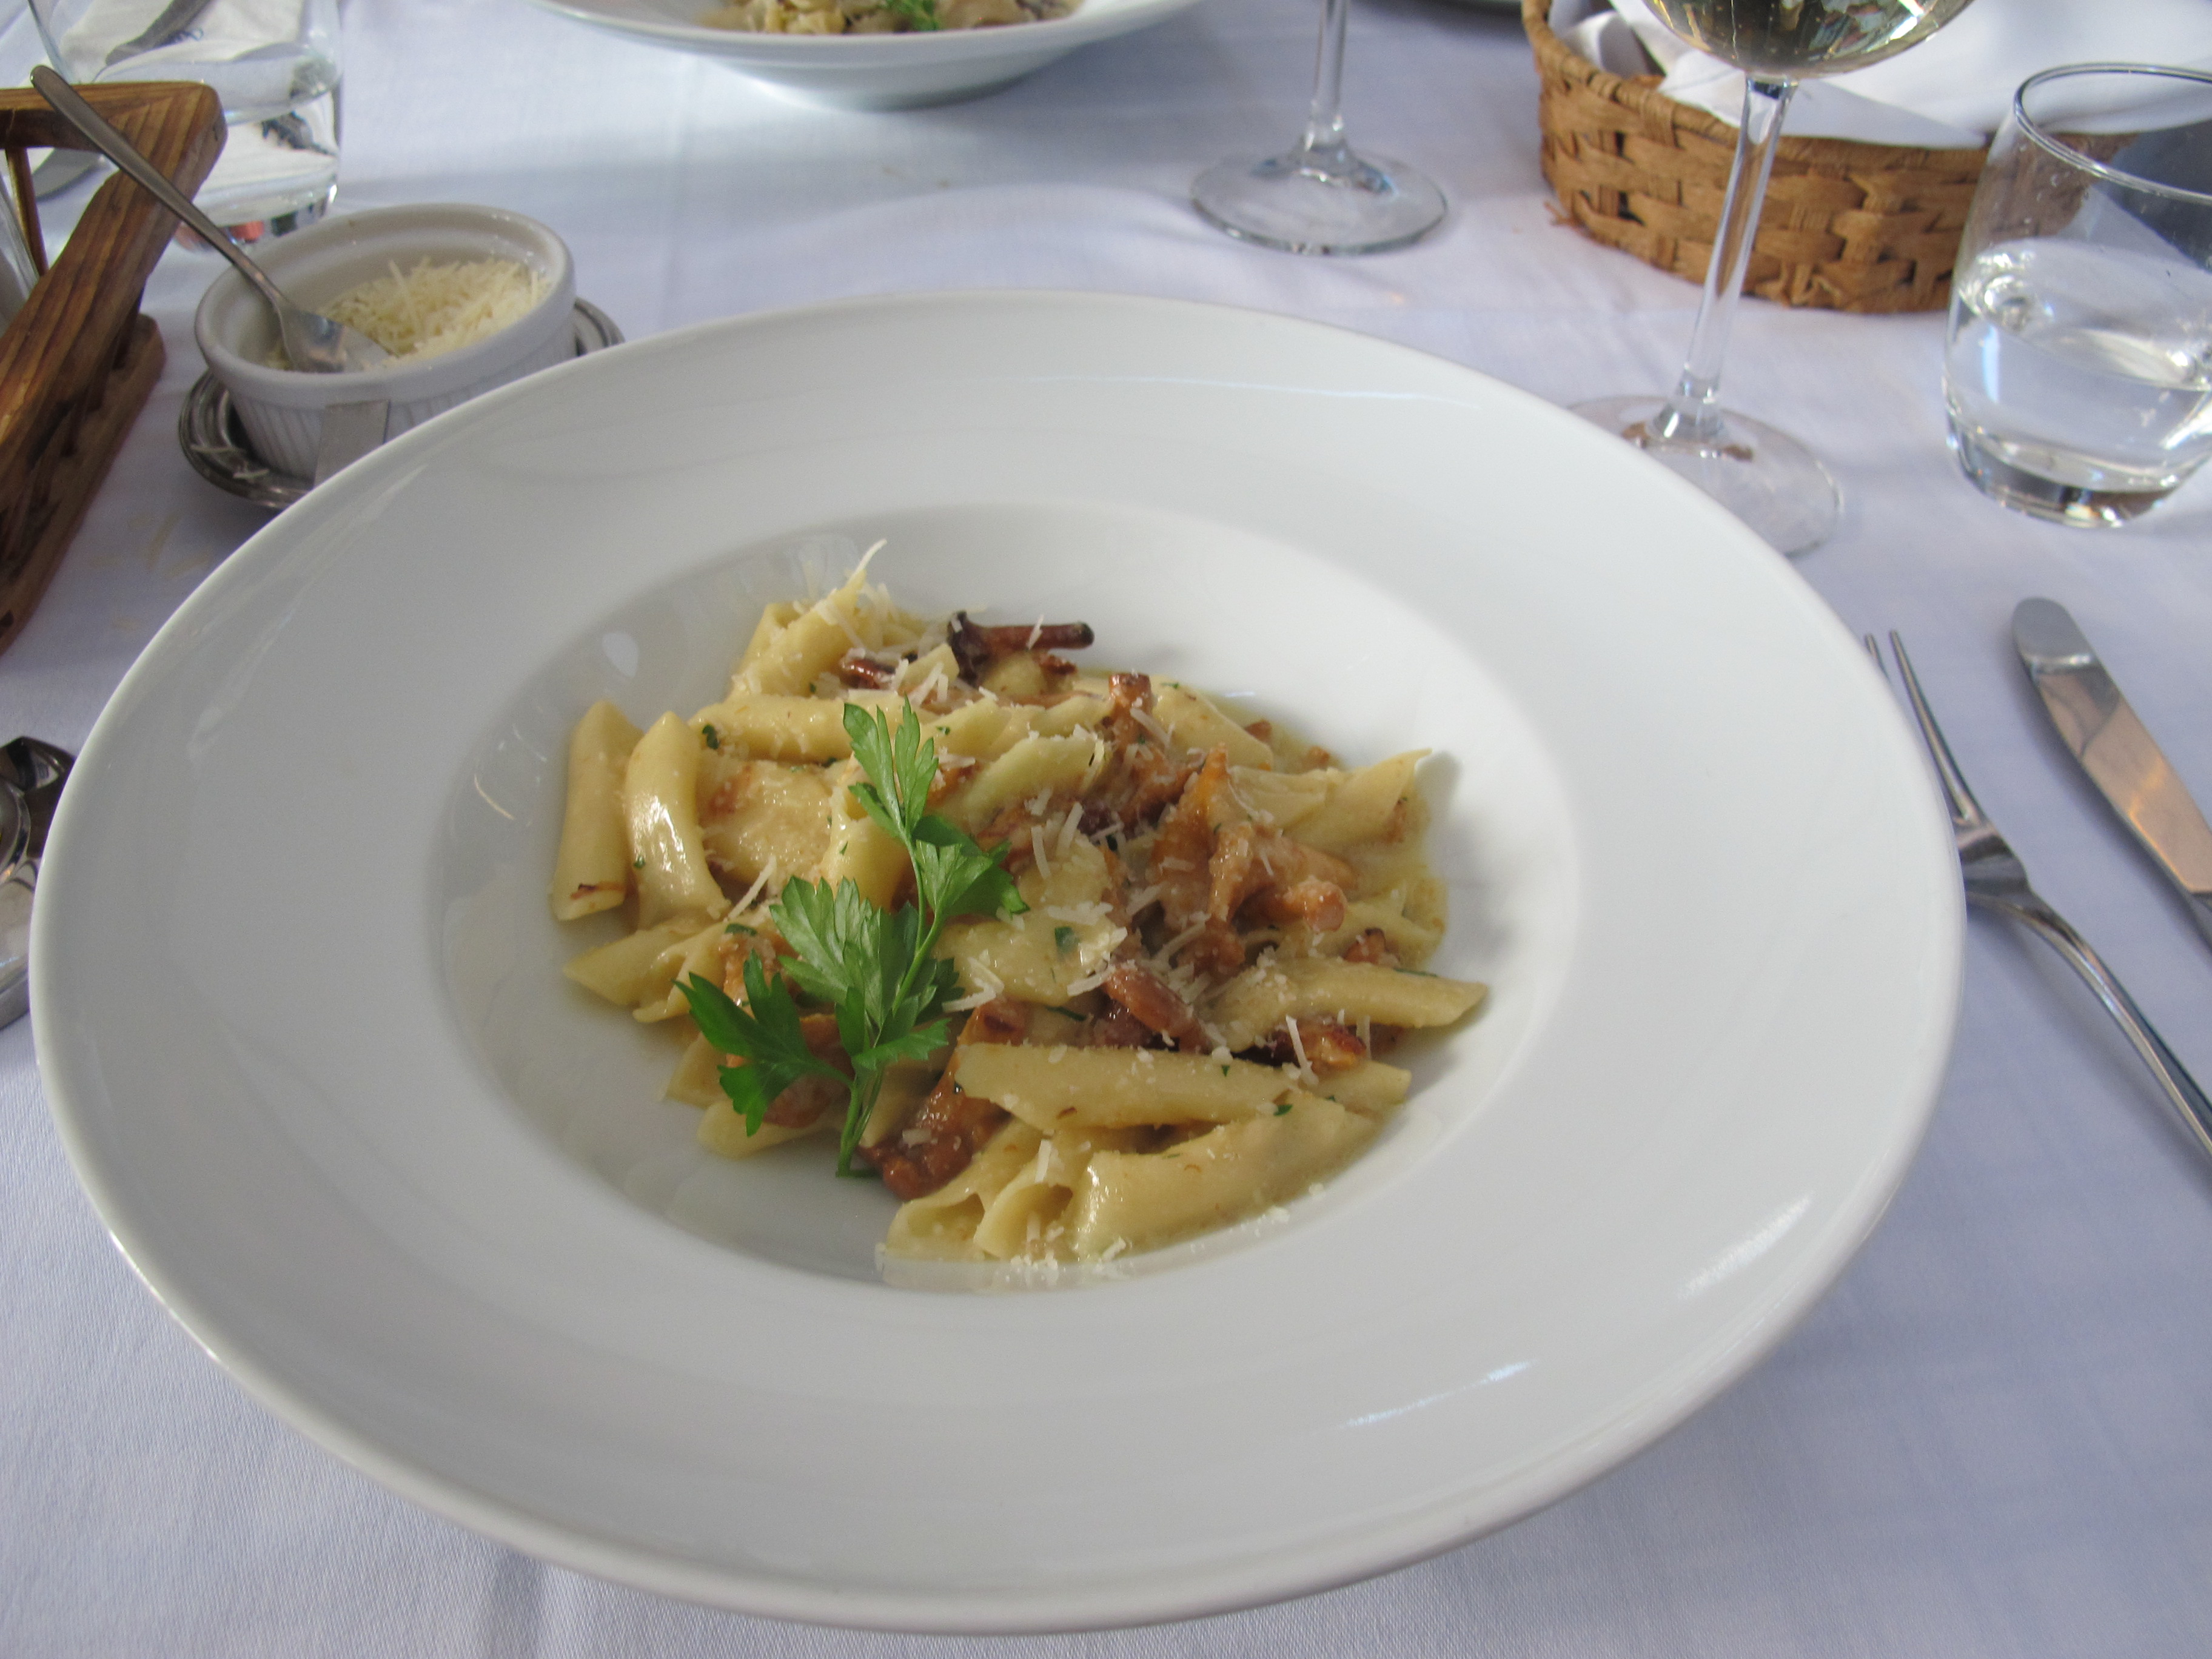 The expansive menu includes numerous pasta dishes, Gnocchi and Risottos.